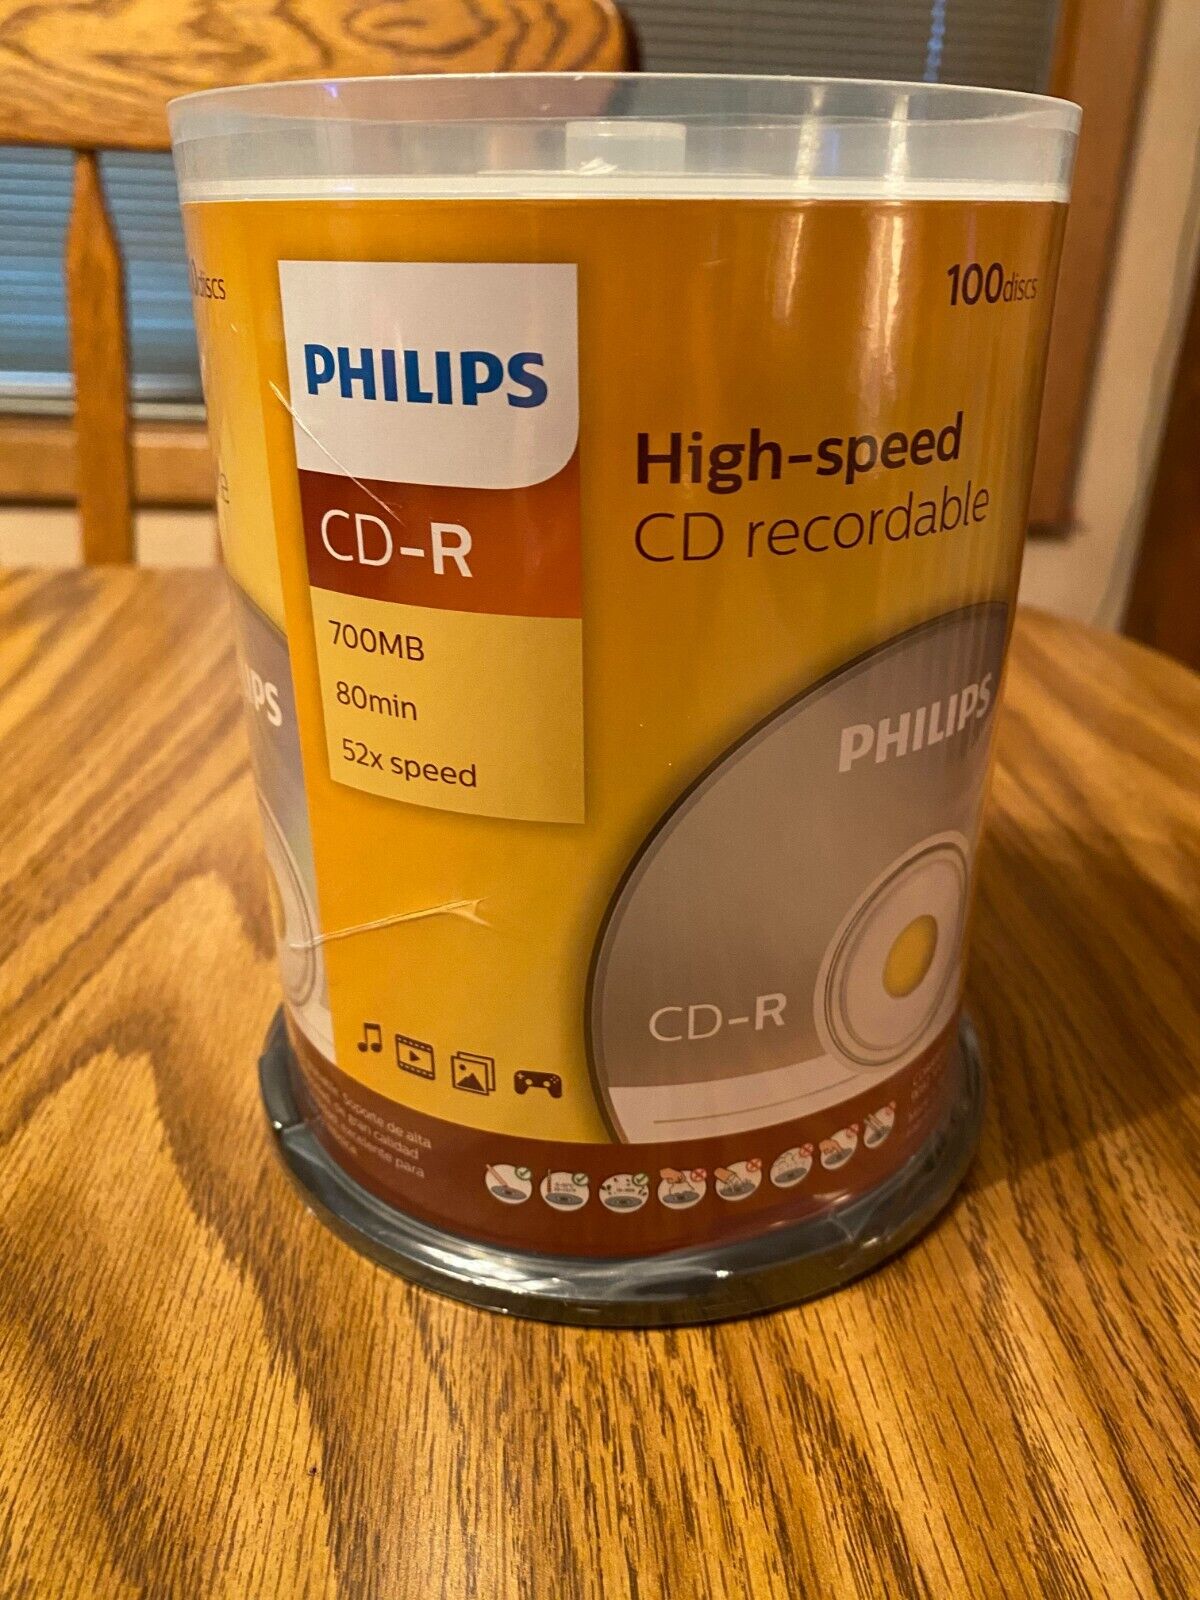 Philips CD-R 700MB 80 Min 52x Speed / High Speed Recordable CDs 100 pack NEW